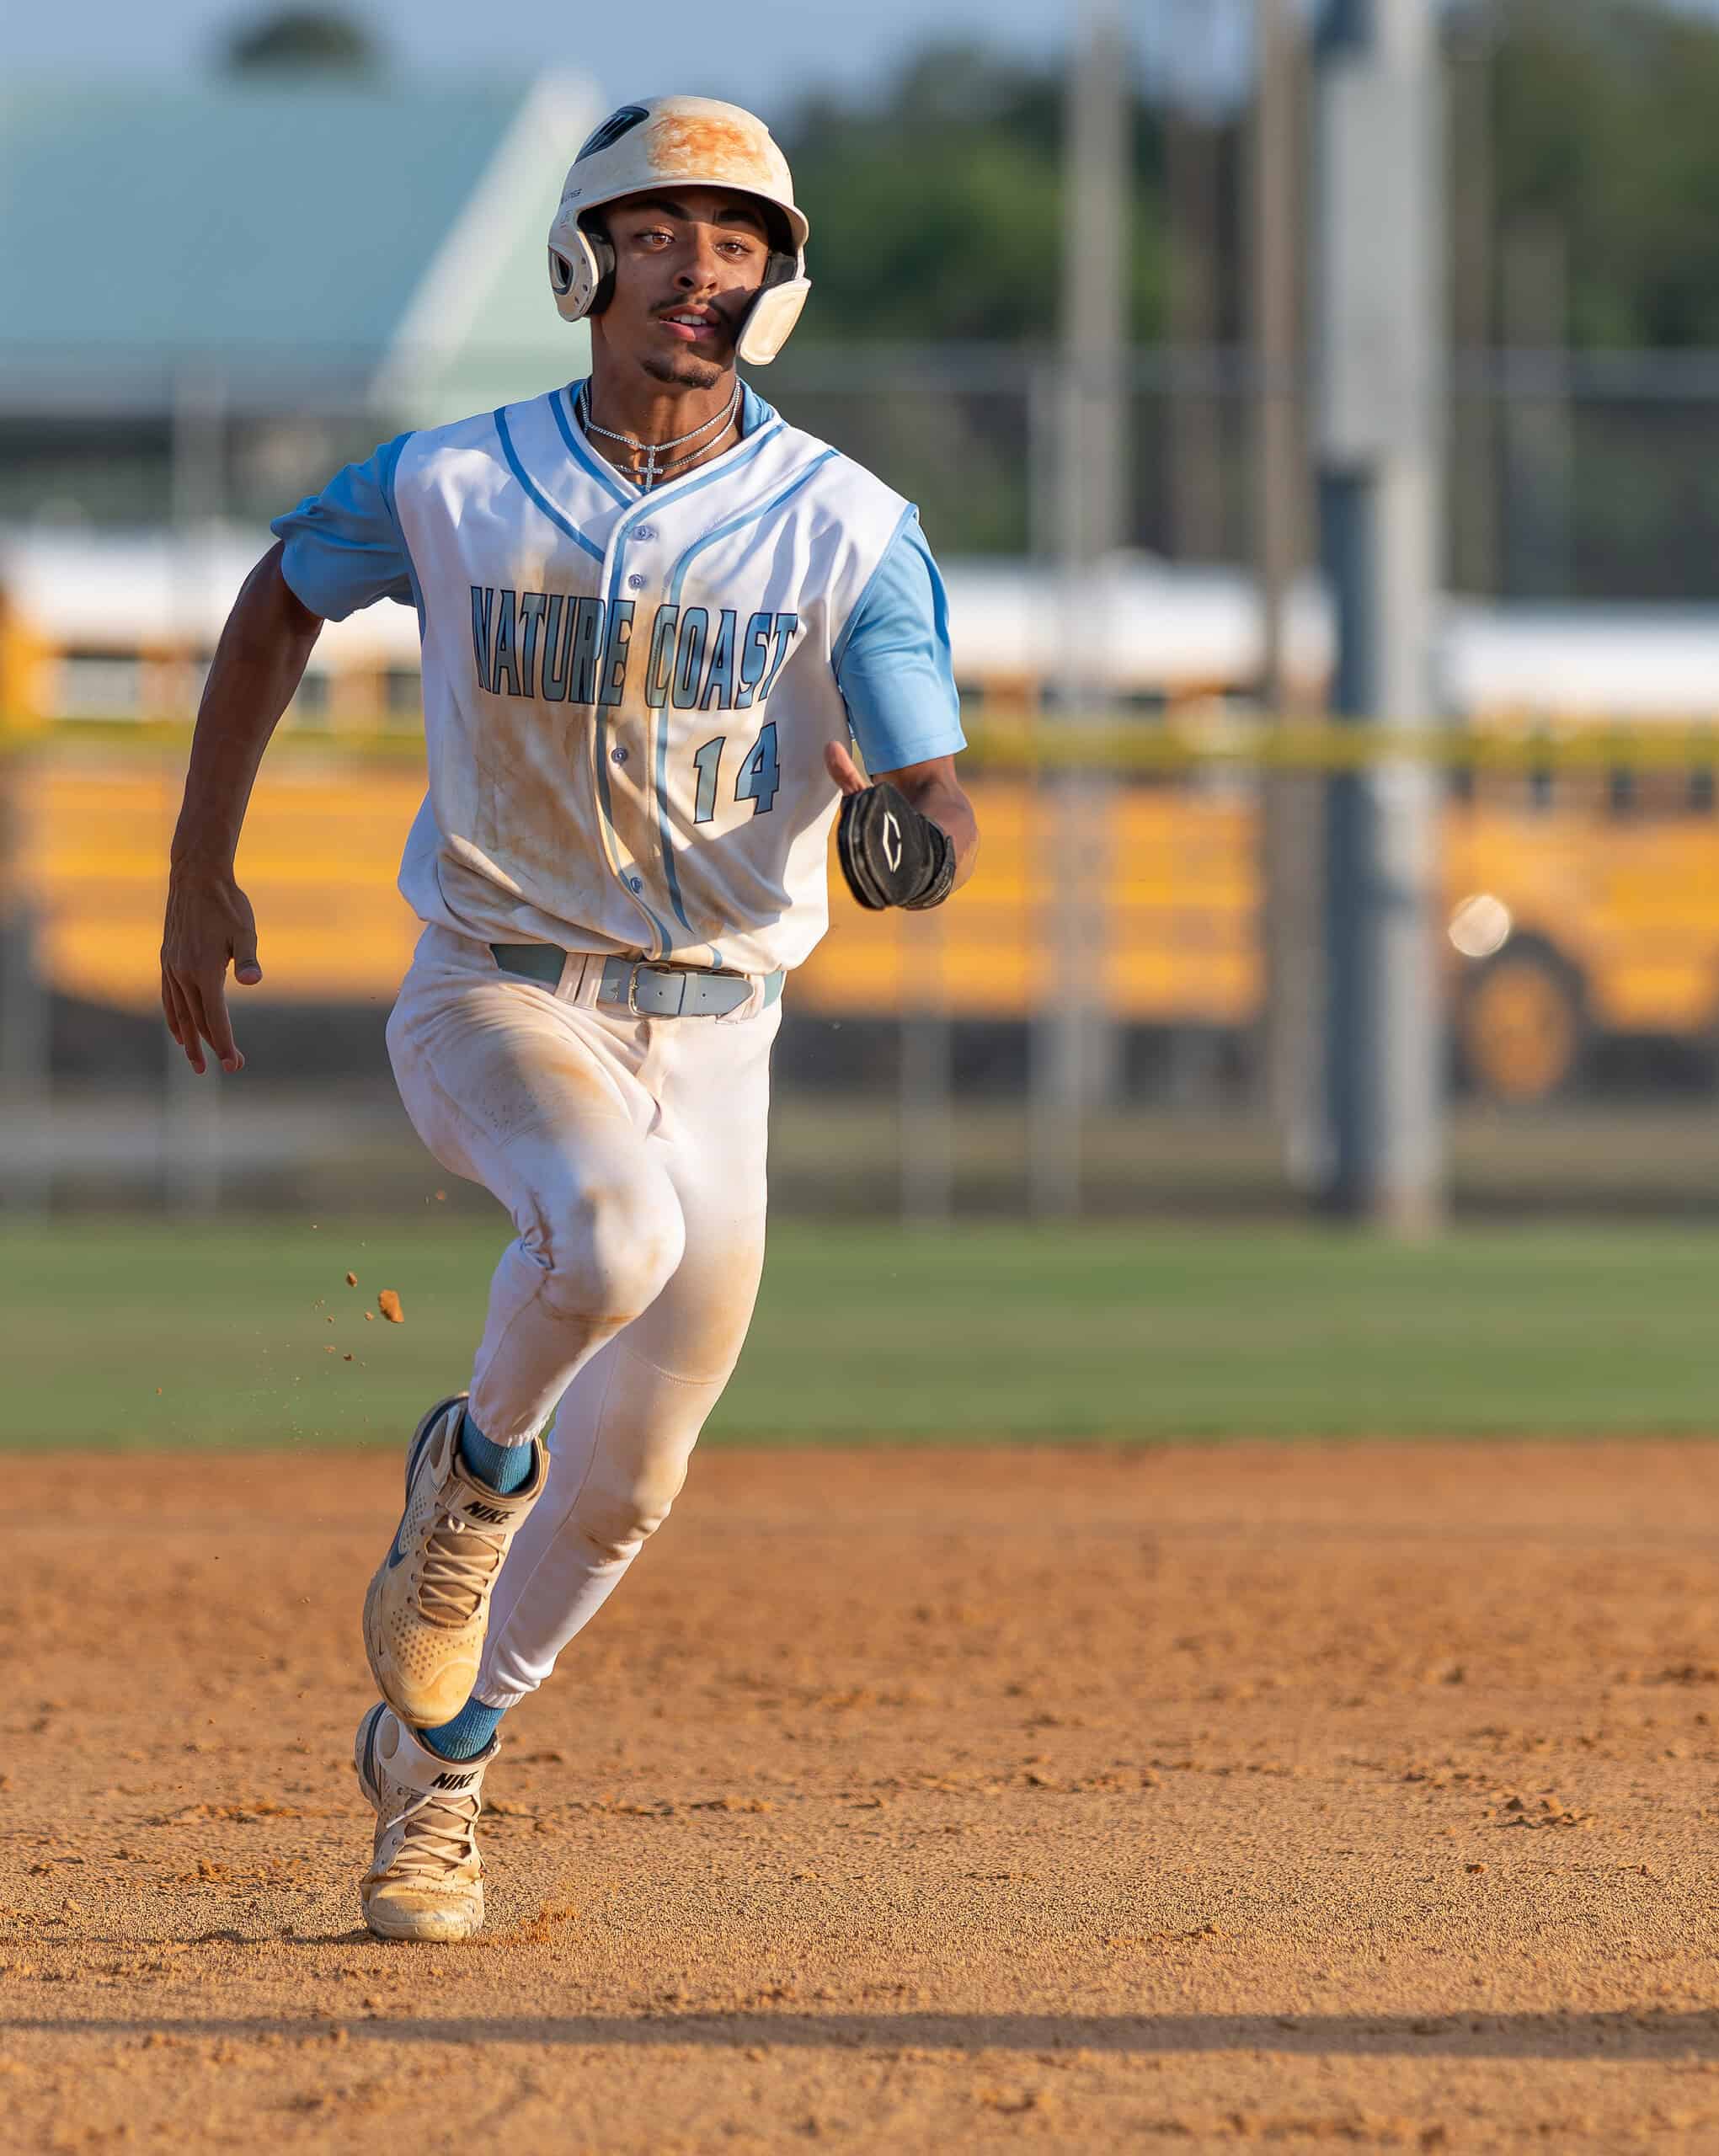 Nature Coast Tech, 14, Nate Leavitt heads to third base in the 4A Regional Quarterfinal game versus visiting Satellite High. Leavitt scored the first run of the game. Photo by [Joseph Dicristofalo]